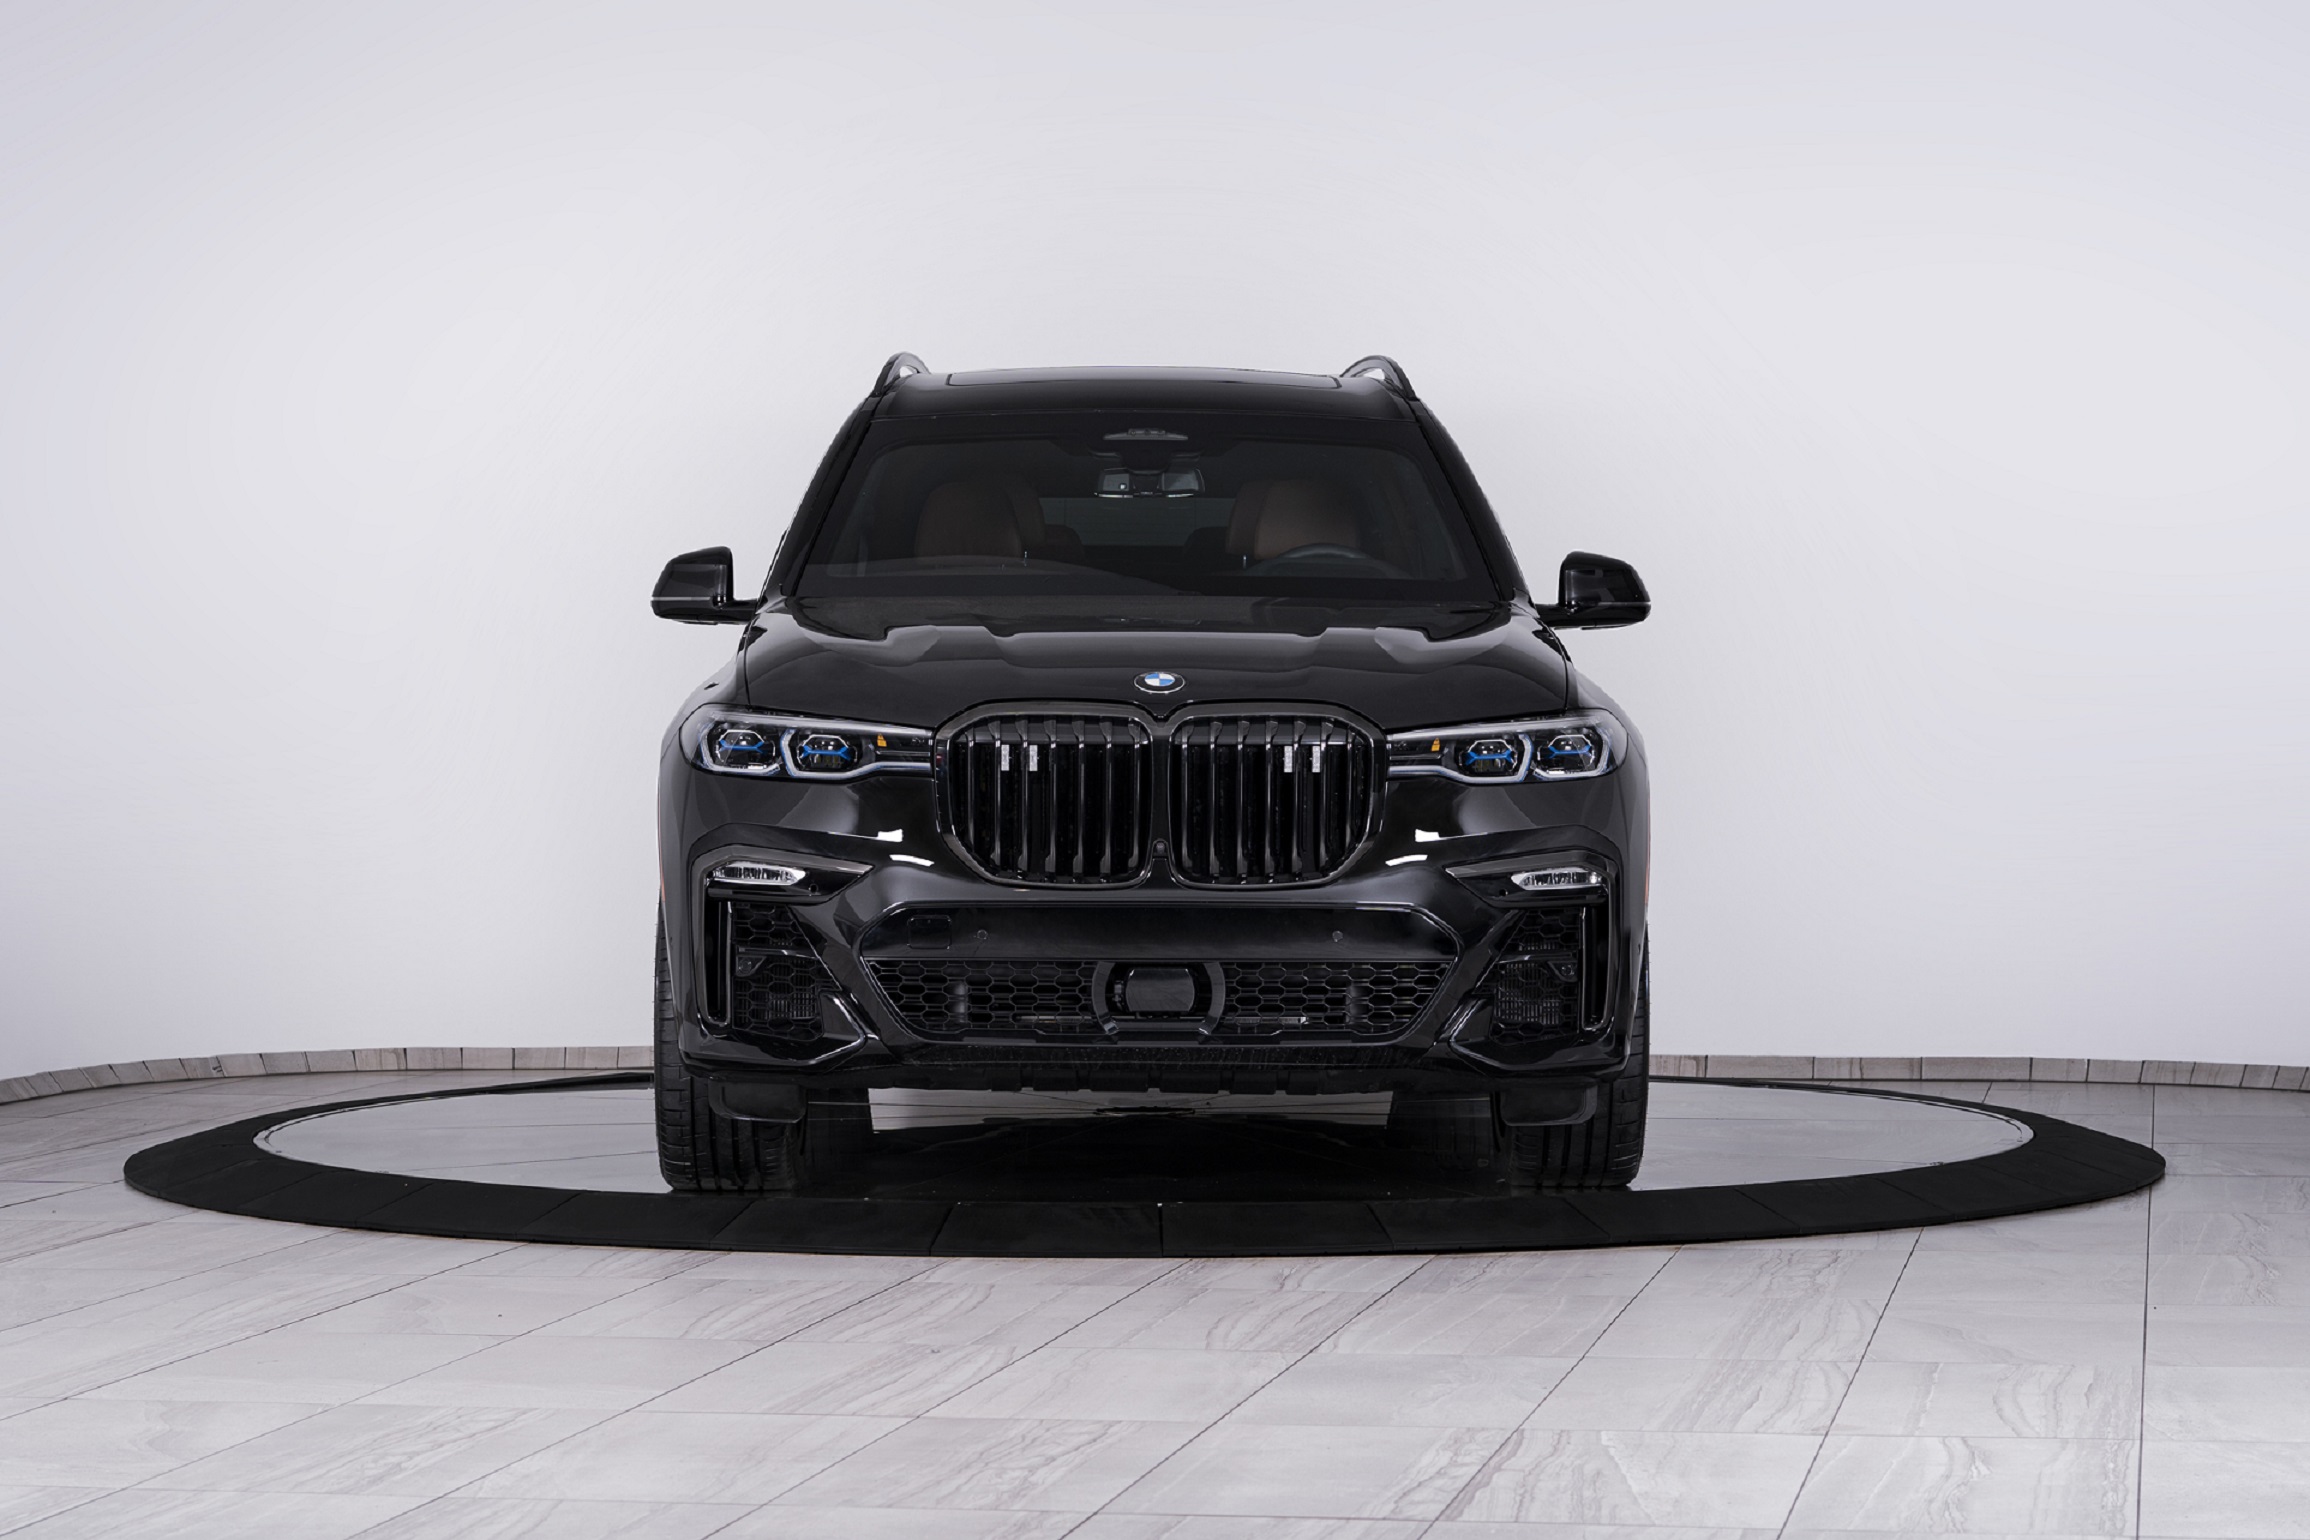 INKAS® Introduces the World’s First Armored BMW X7